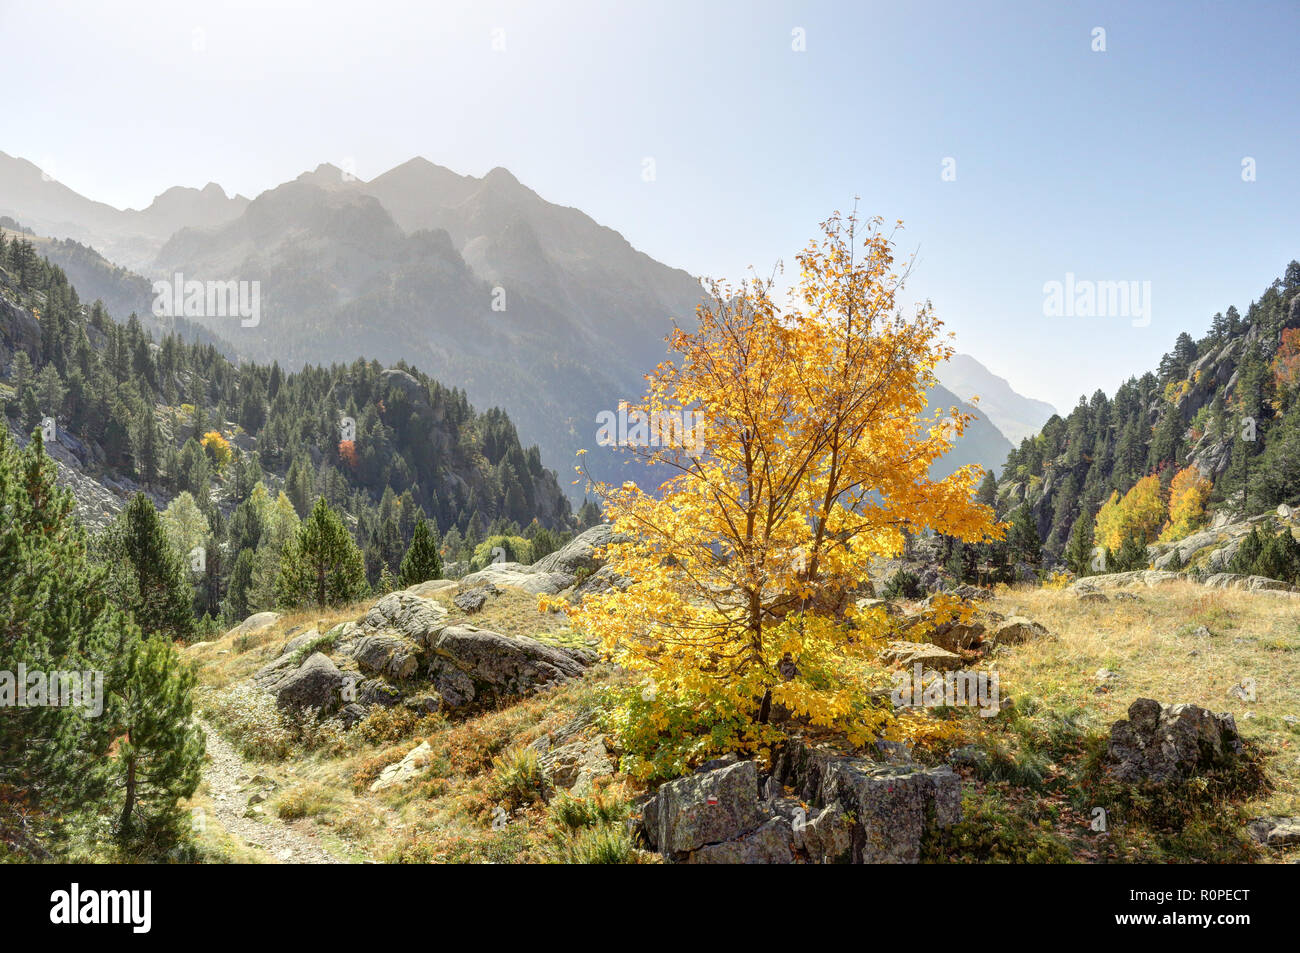 A landscape of the high rocky mountains with a big yellow tree among a pine forest in a sunny autumn, in Panticosa, Aragon Pyrenees, Spain Stock Photo